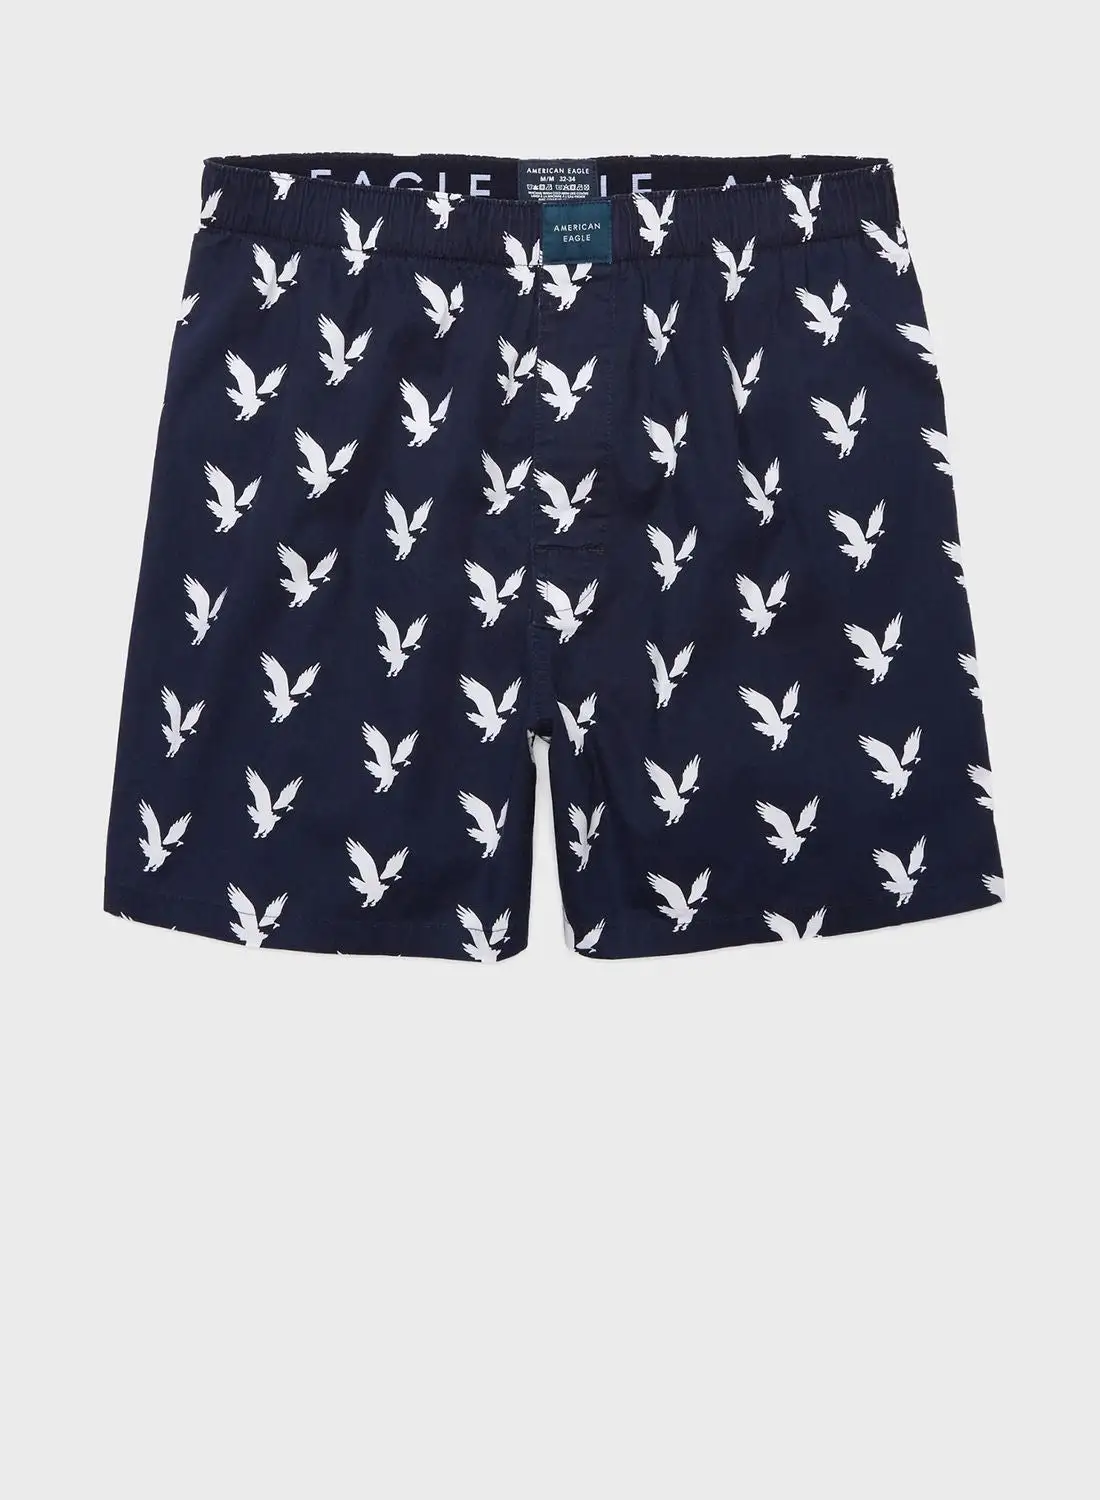 American Eagle All Over Printed Boxer Shorts